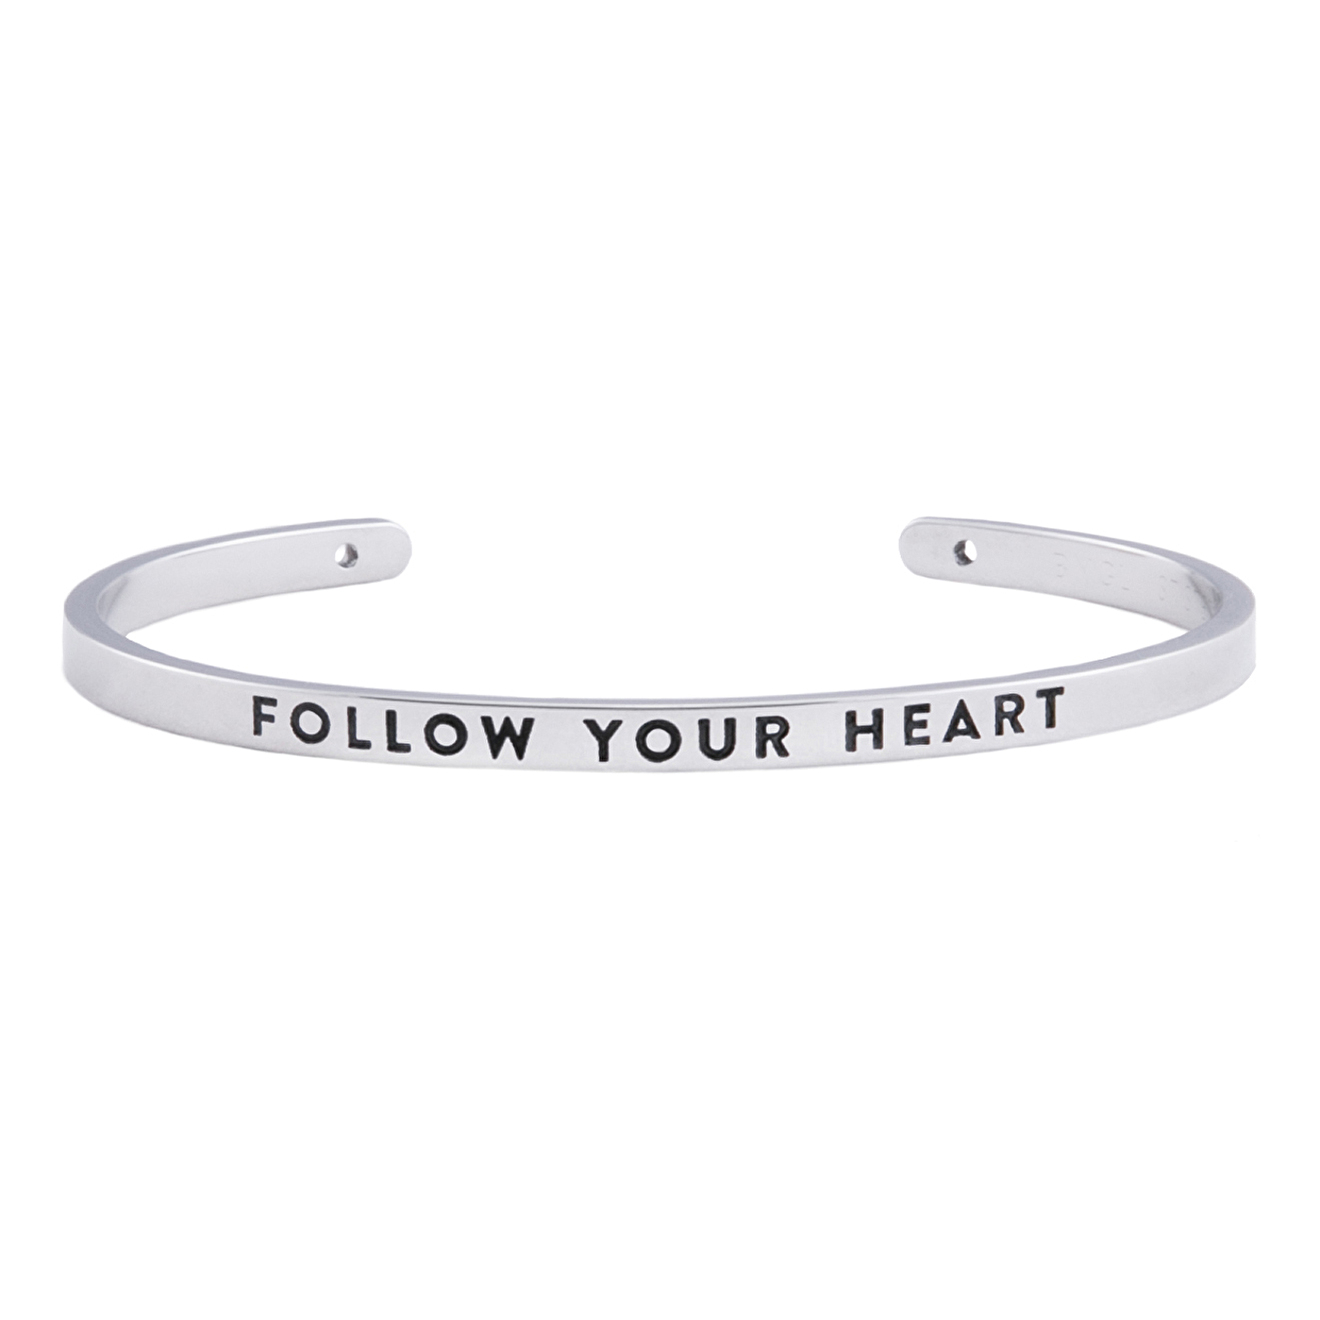 BNGL браслет FOLLOW YOUR HEART bngl браслет follow your heart